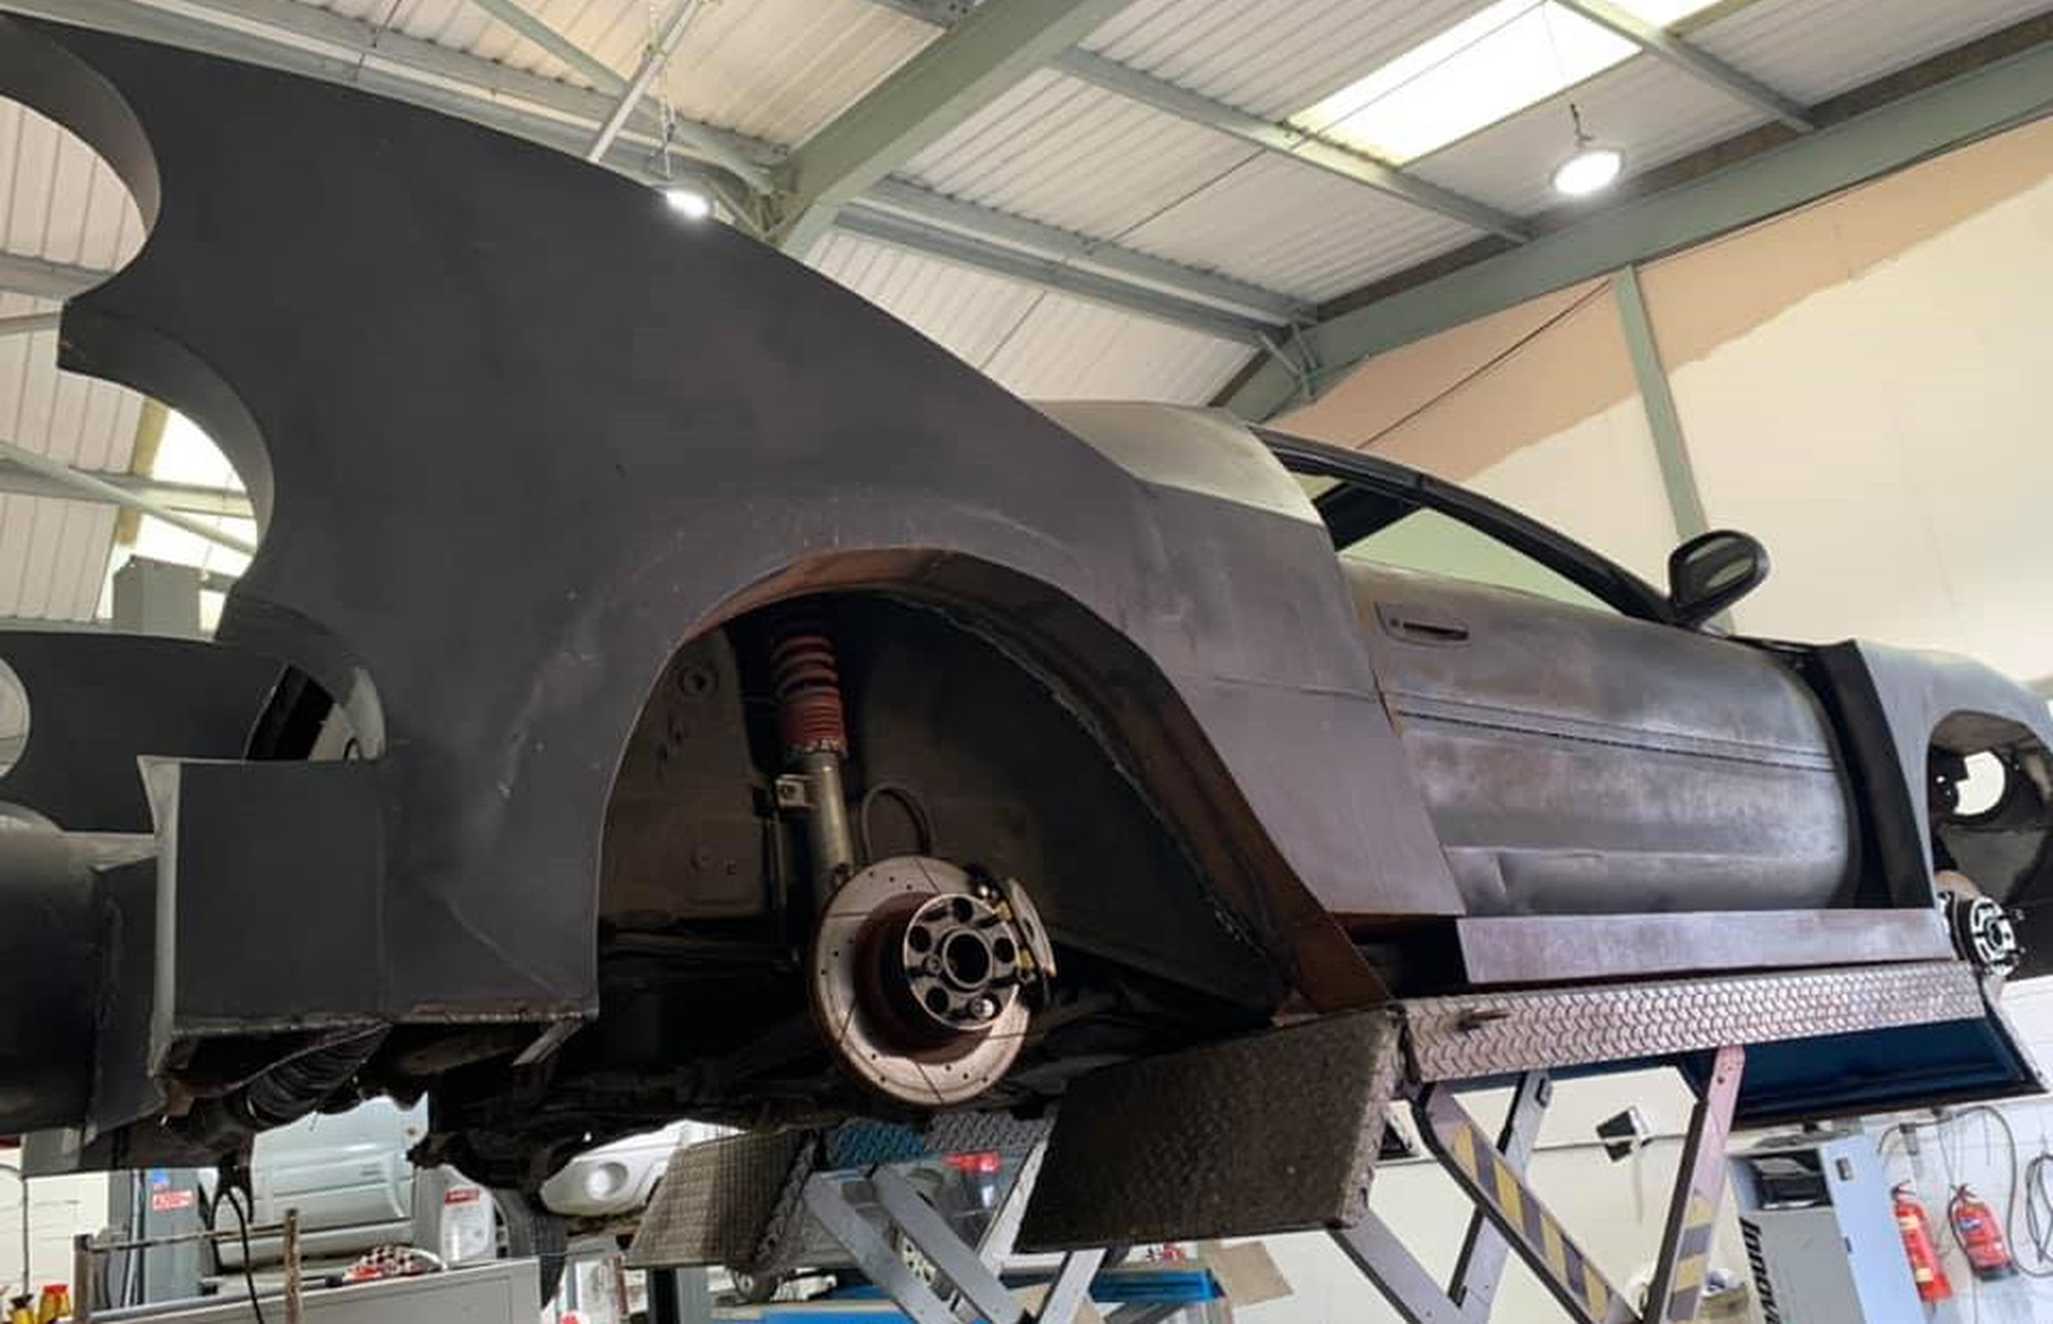 The Batmobile under construction in a garage.